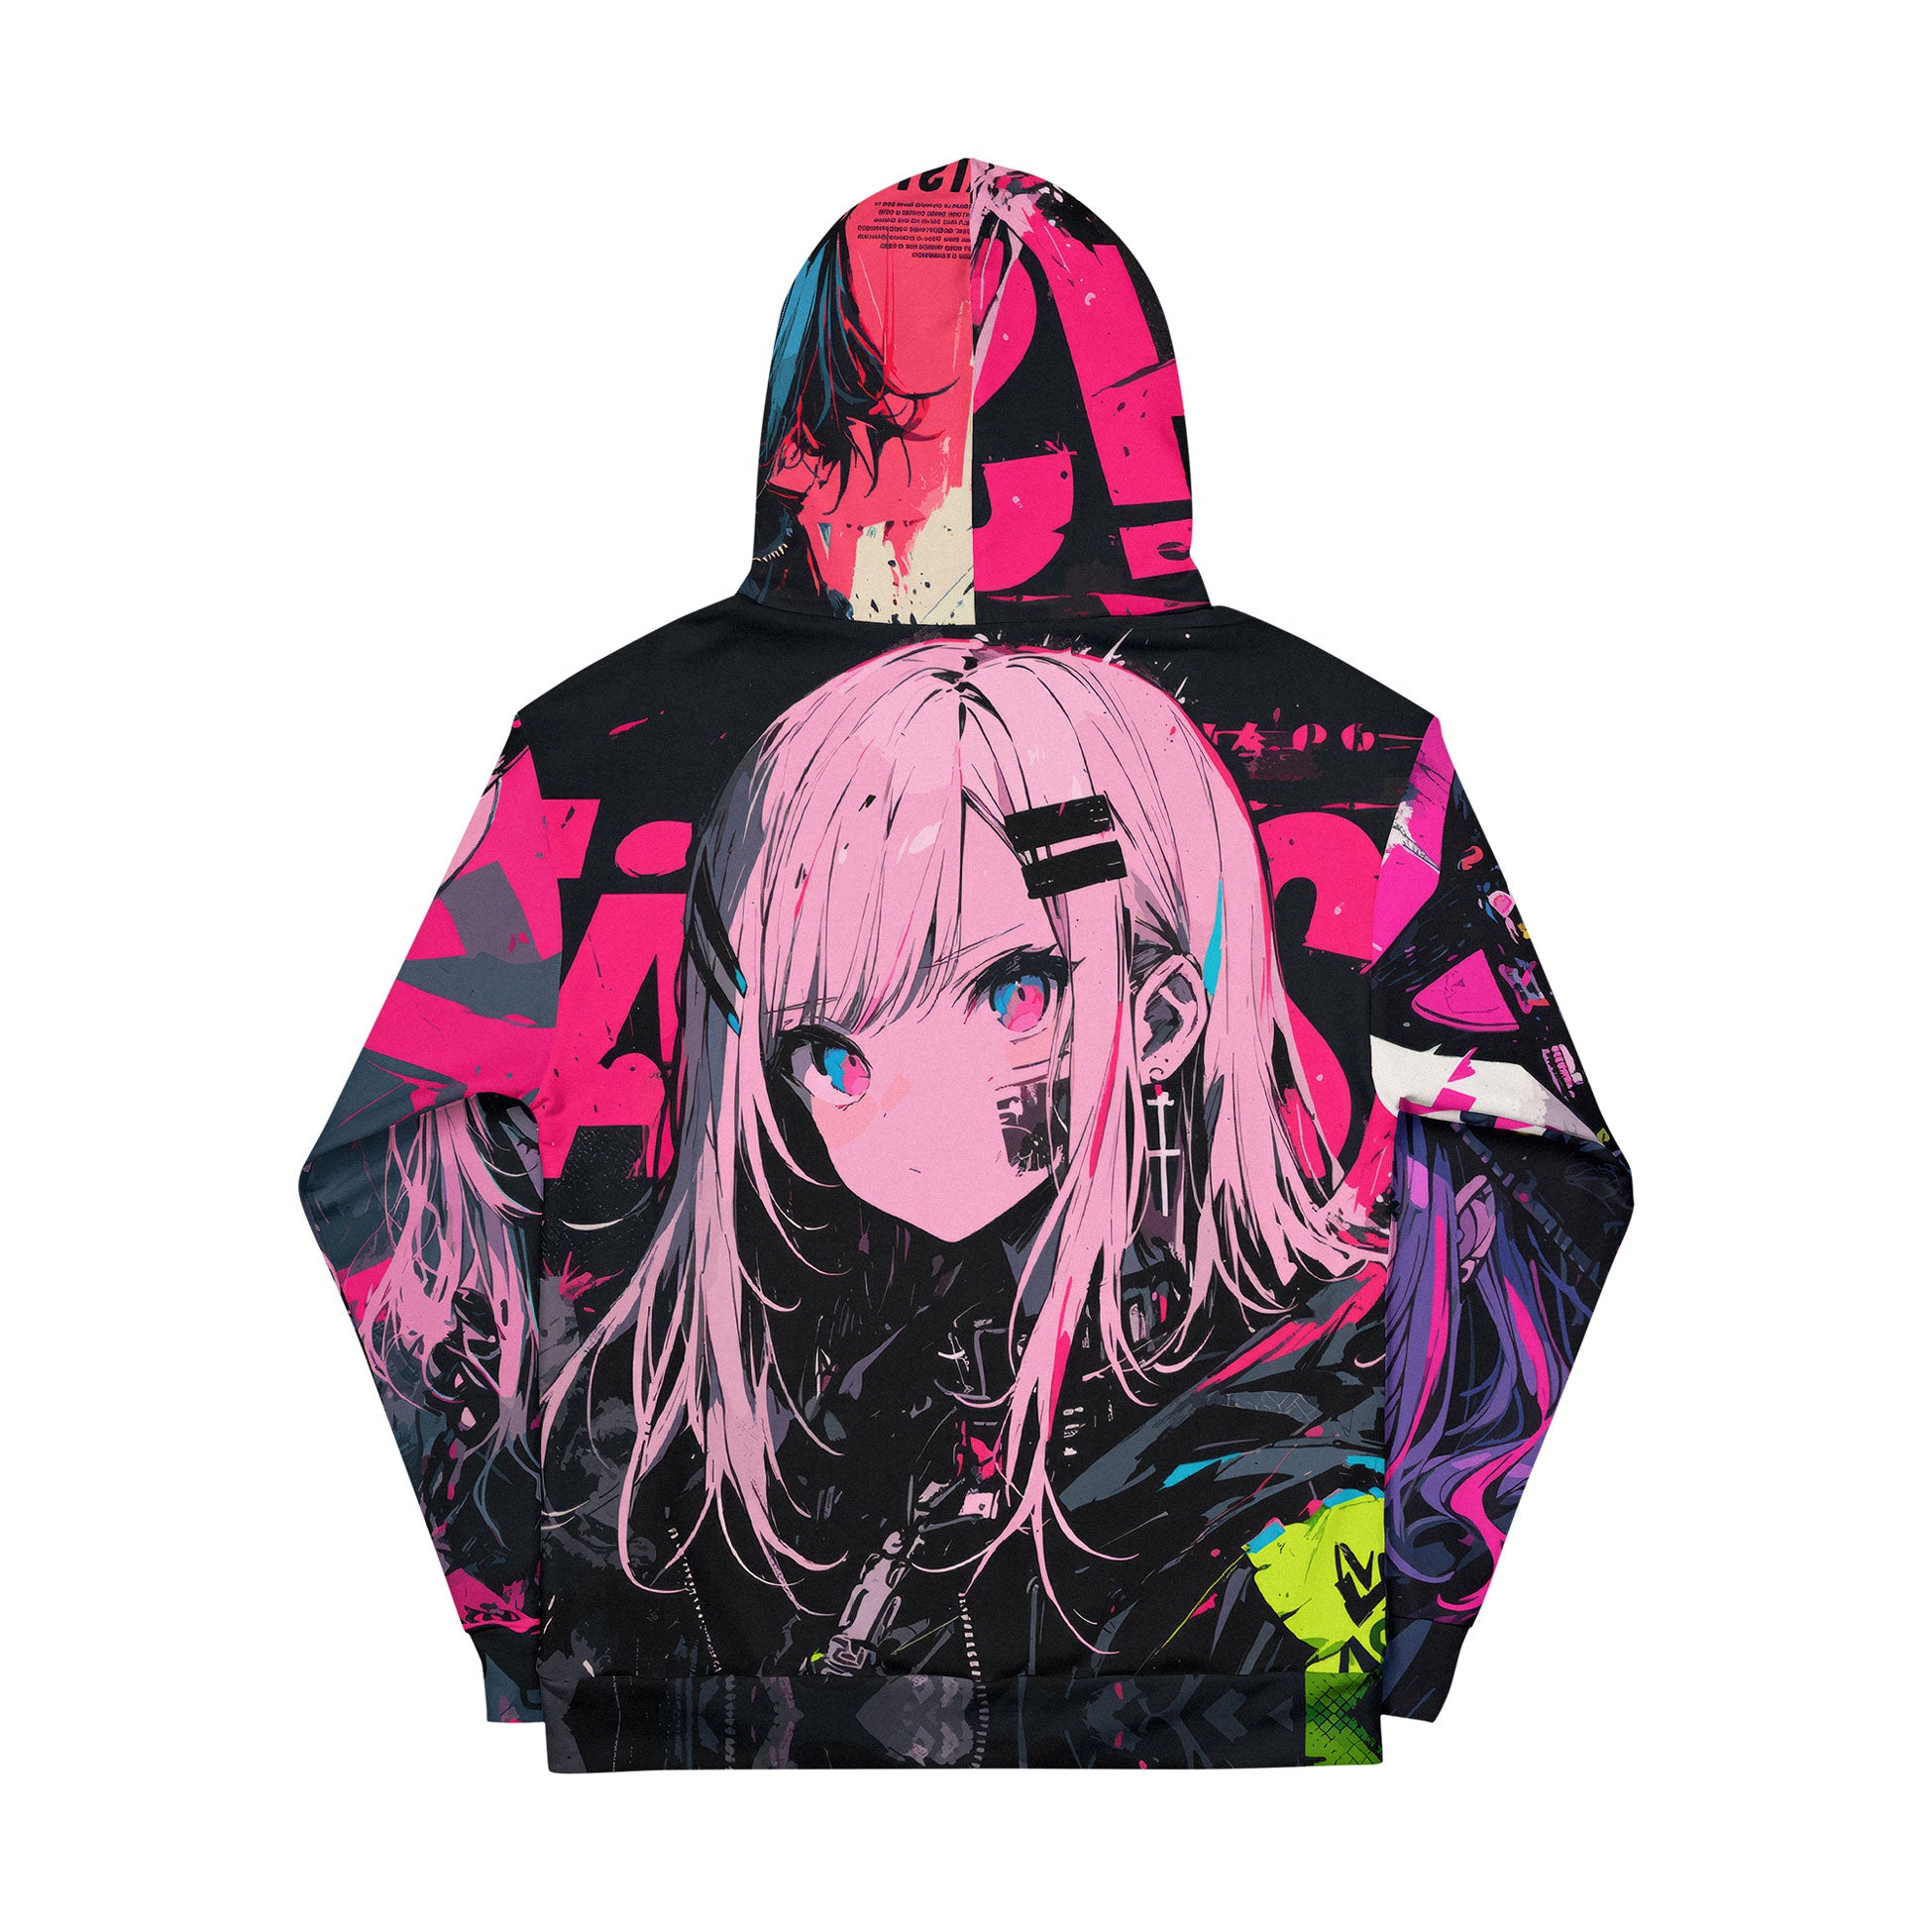 • Limited quantities • Precisely printed, cut & hand sewn • 70% polyester, 27% cotton, 3% elastane • Fabric weight: 8.85 oz • Soft cotton-feel fabric face • Brushed fleece fabric inside • Double-lined hood with design on both sides • Unisex style • Comes with drawstrings • Overlock seams